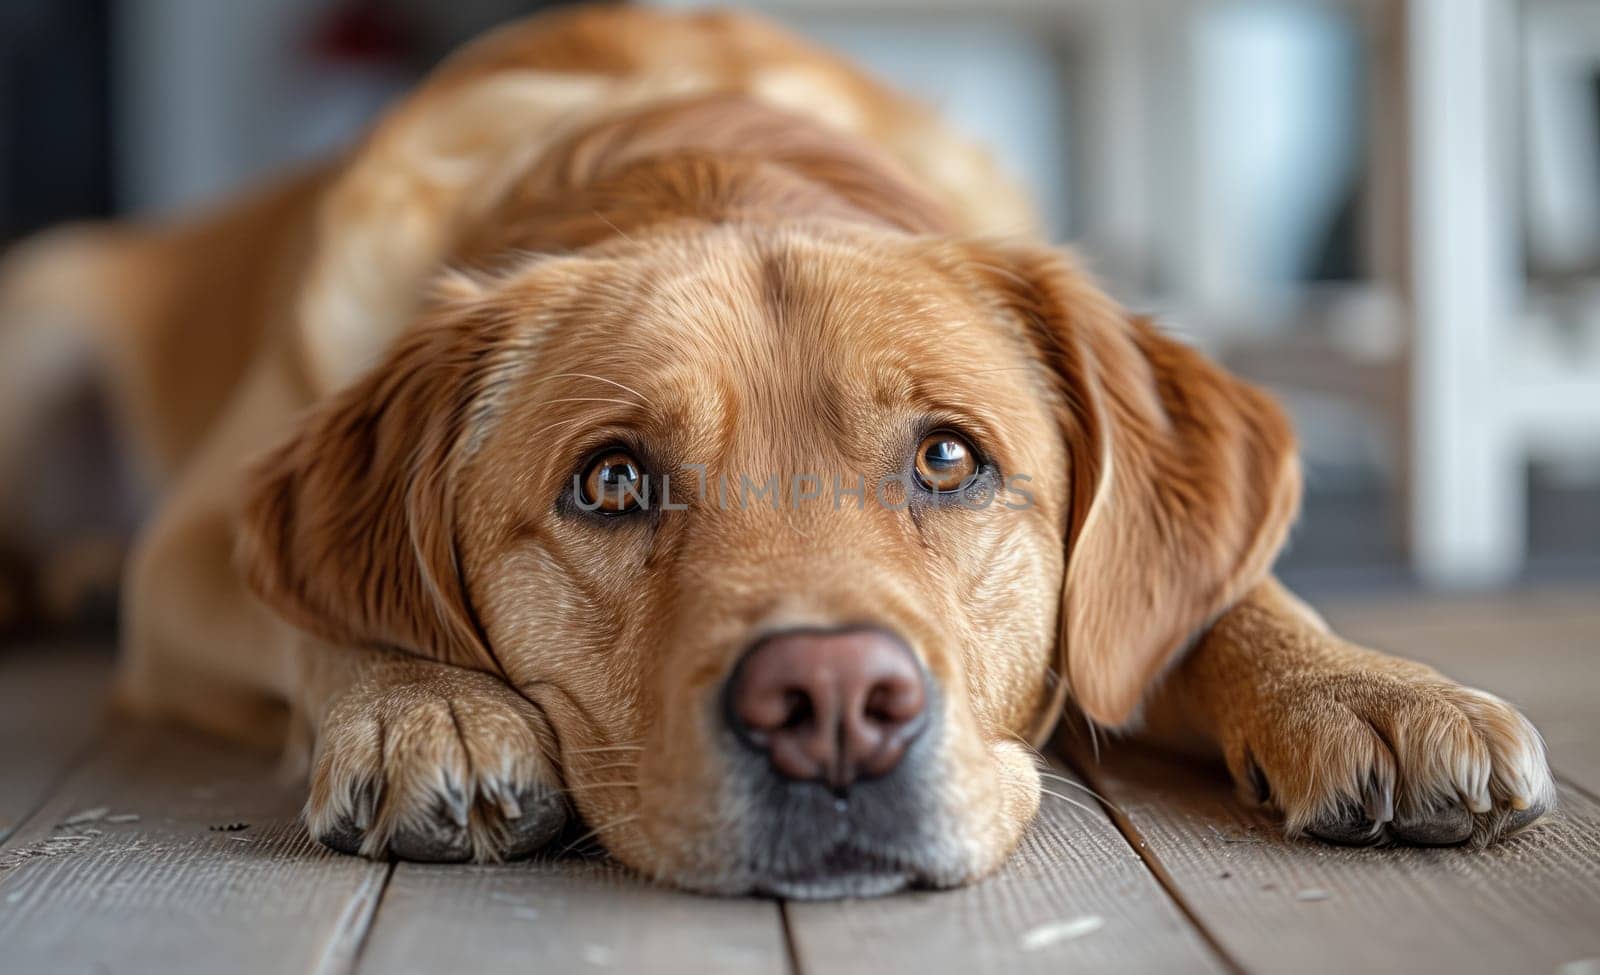 A fawncolored dog, a companion breed, is resting on a wooden floor with its head on its paws. This carnivorous terrestrial animal is wearing a collar